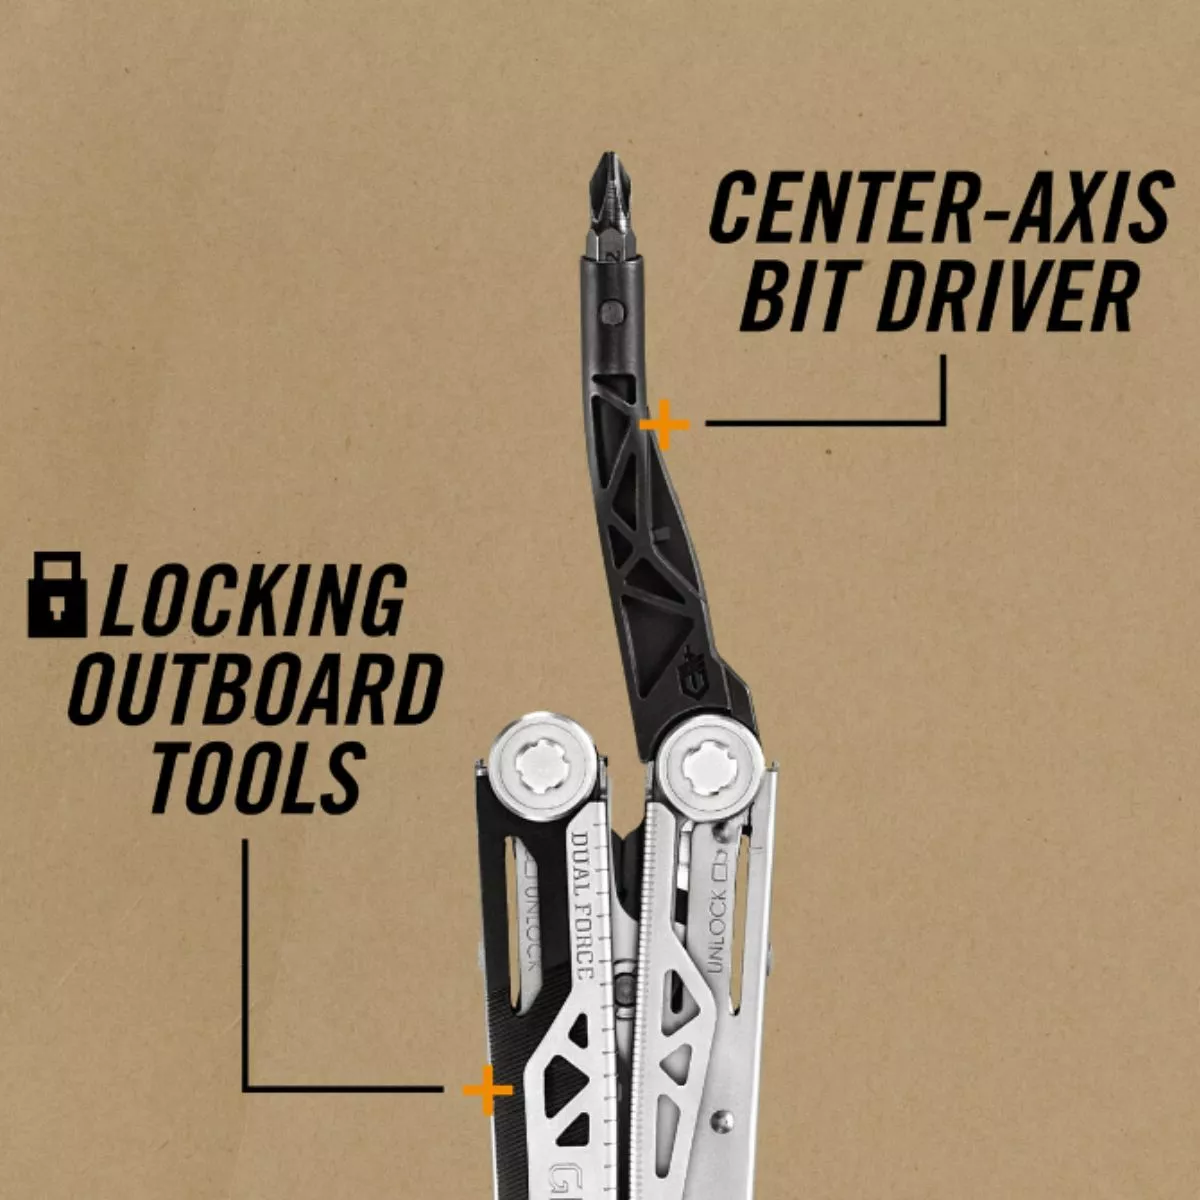 Multitool EDC (everyday carry) GERBER, Dual Force BB 10